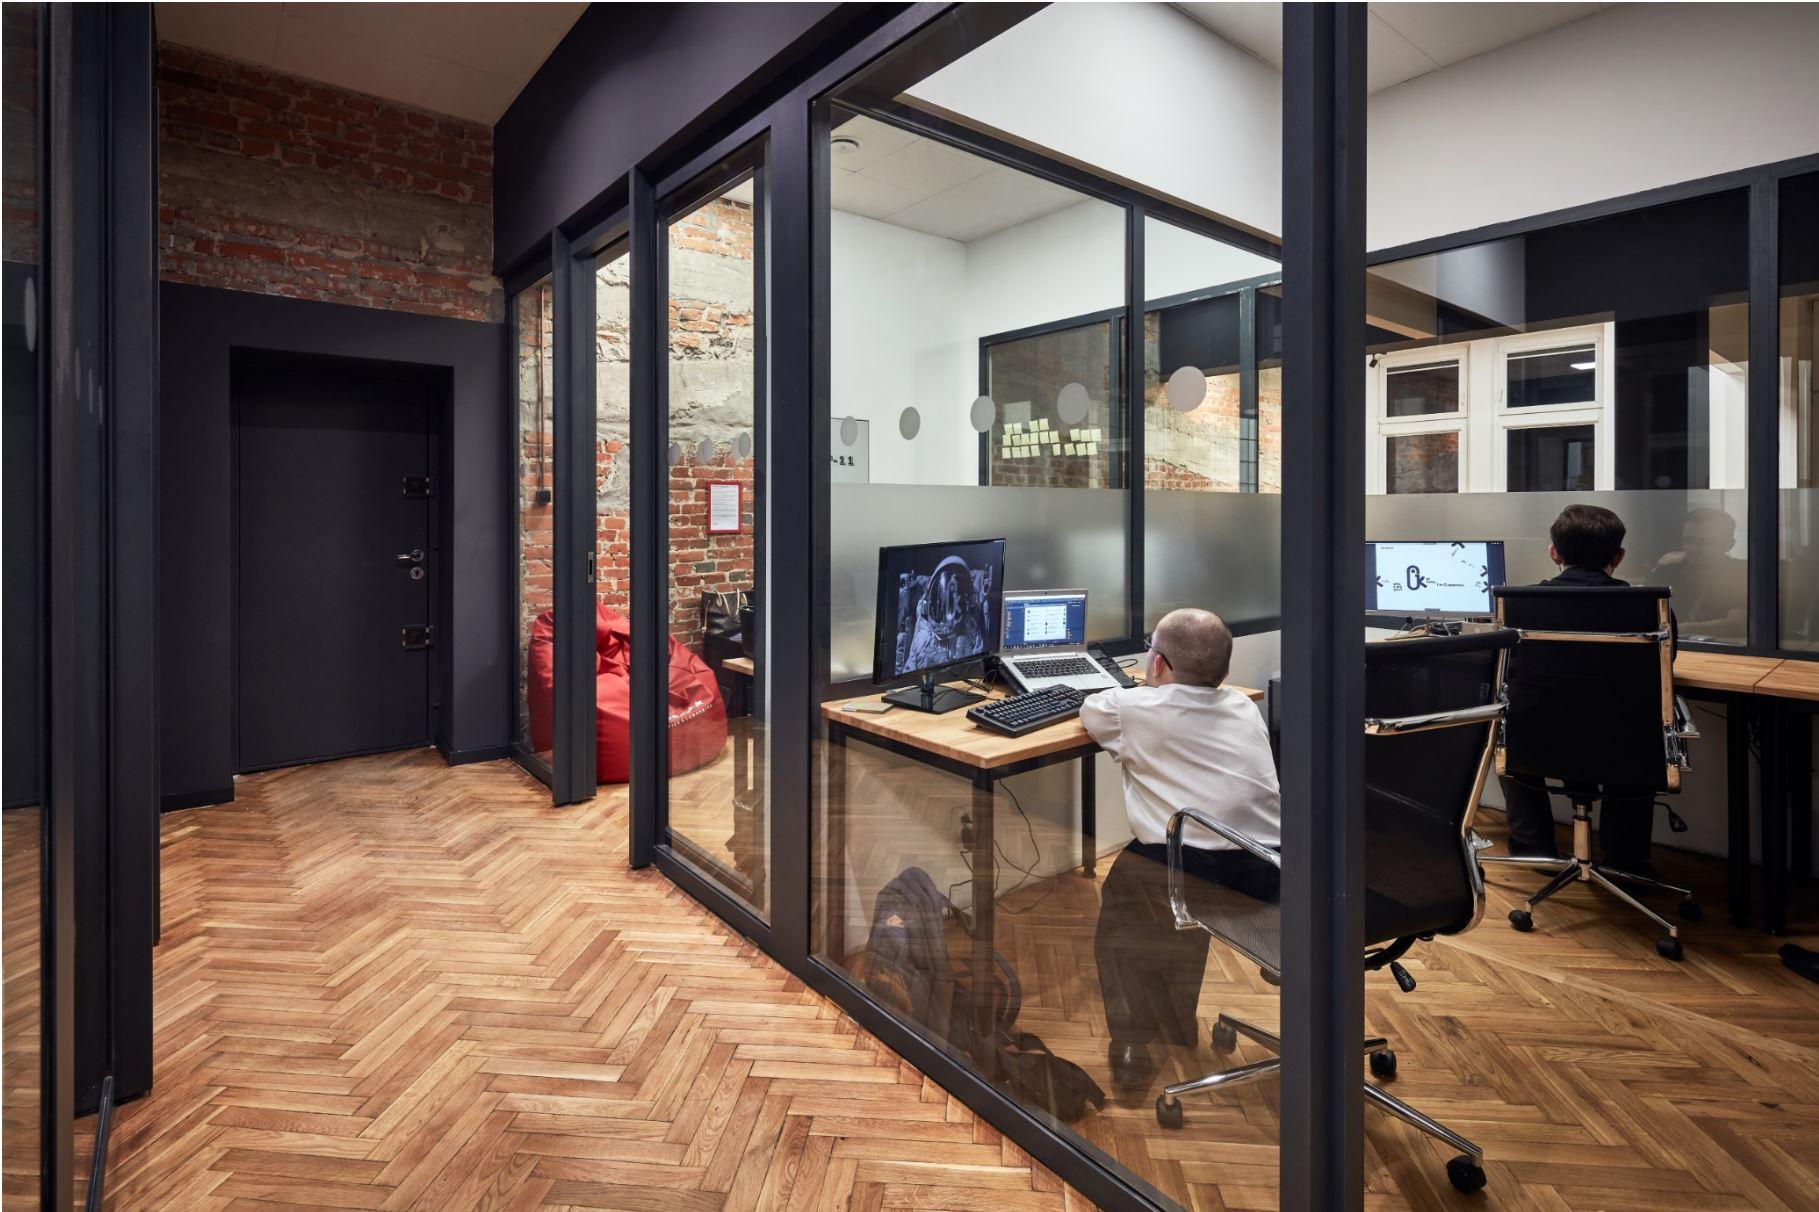 Interior of CoSpot office and coworking